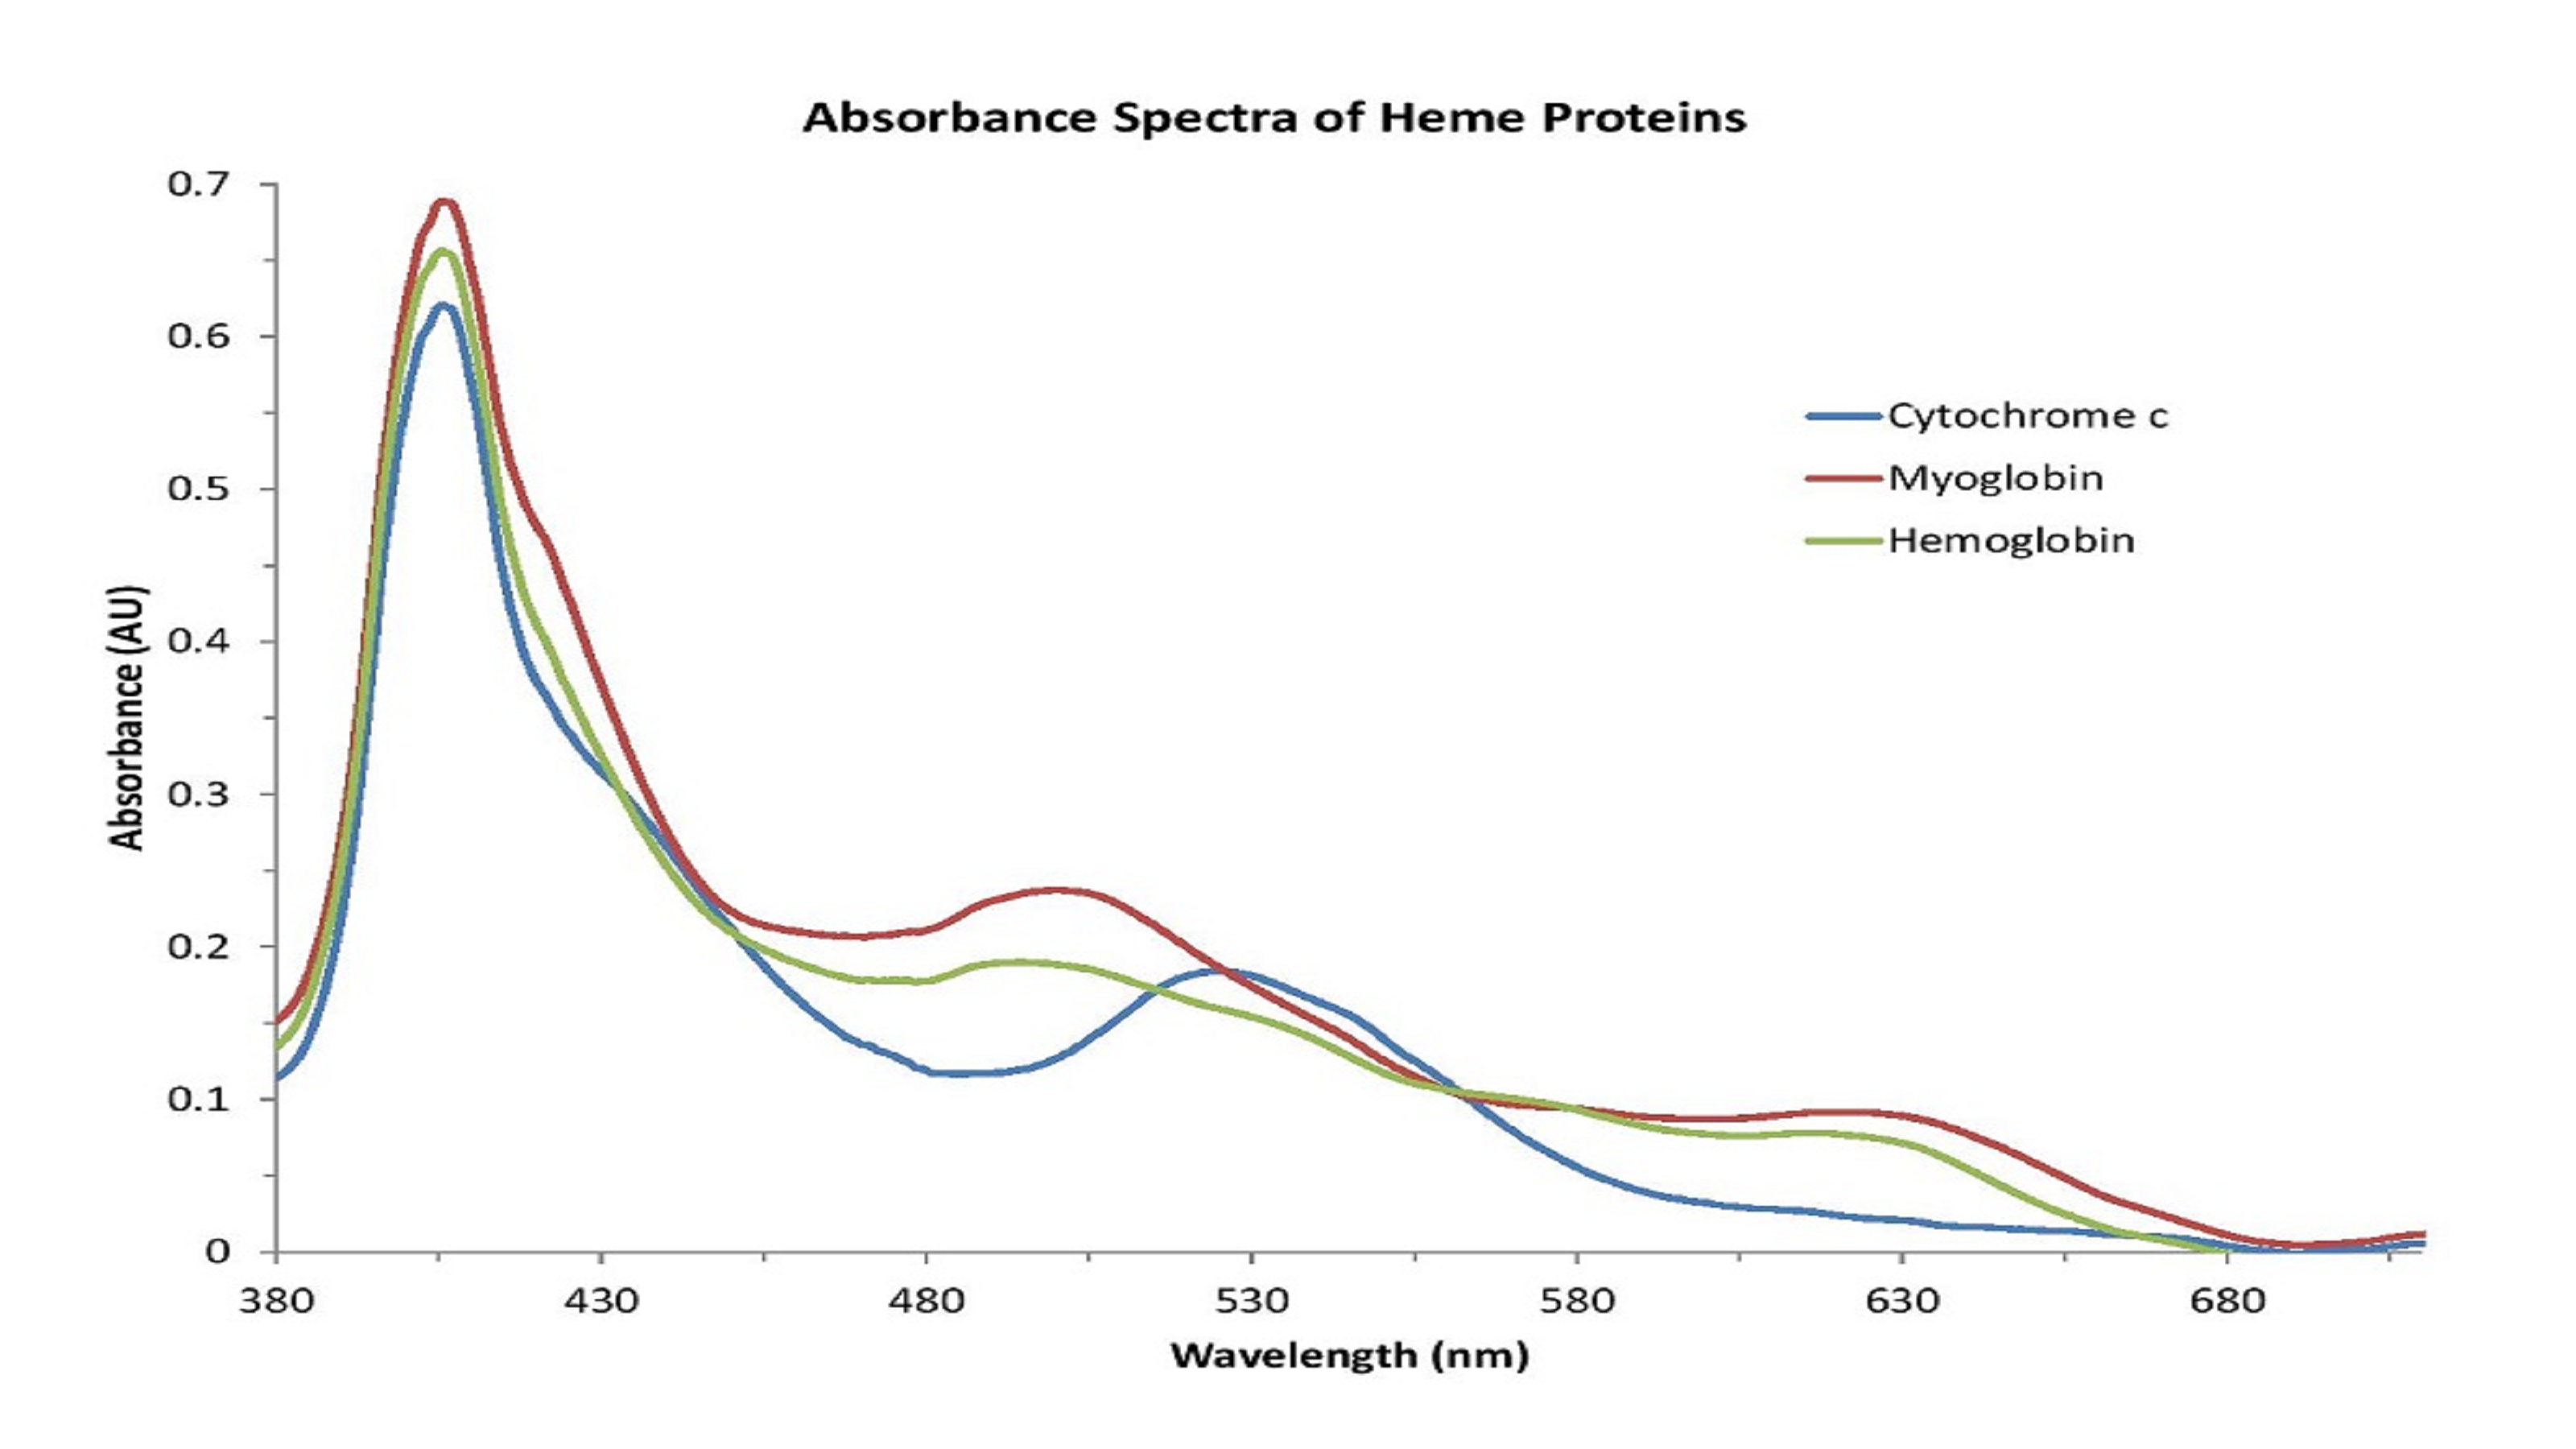 Metalloproteins share similar absorbance features related to the presence of the heme group.